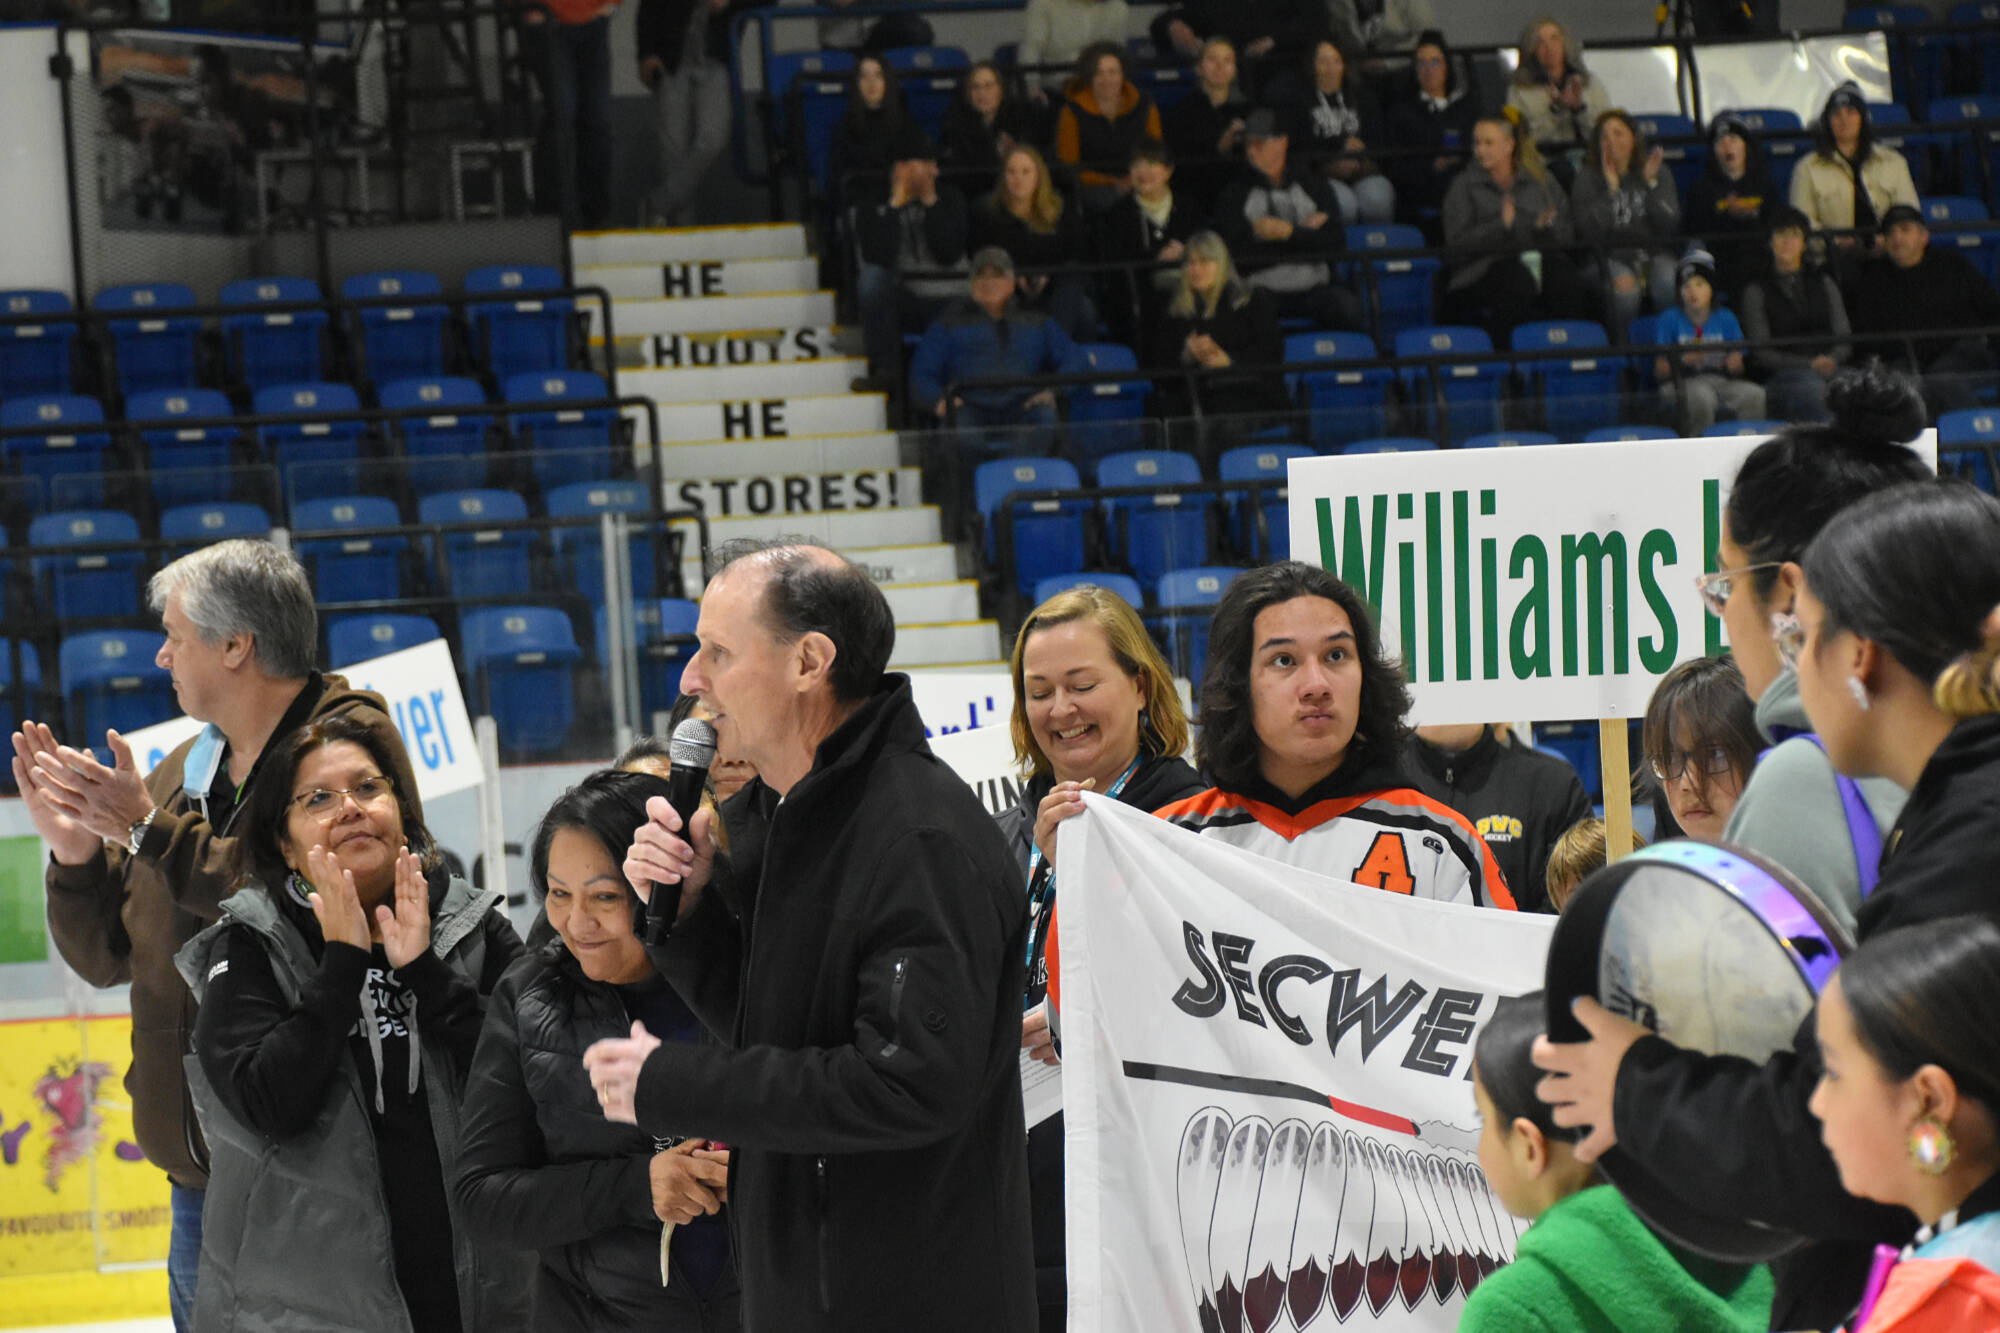 Salmon Arm Mayor Alan Harrison expresses his appreciation Sunday, March 20 for the Secwépemc flag now in the Spectator Arena at Shaw Centre, as well as welcoming all the teams who have come from all over B.C. to participate in the Tier2 U13 provincial championships, ongoing through March 23. (Martha Wickett - Salmon Arm Observer)